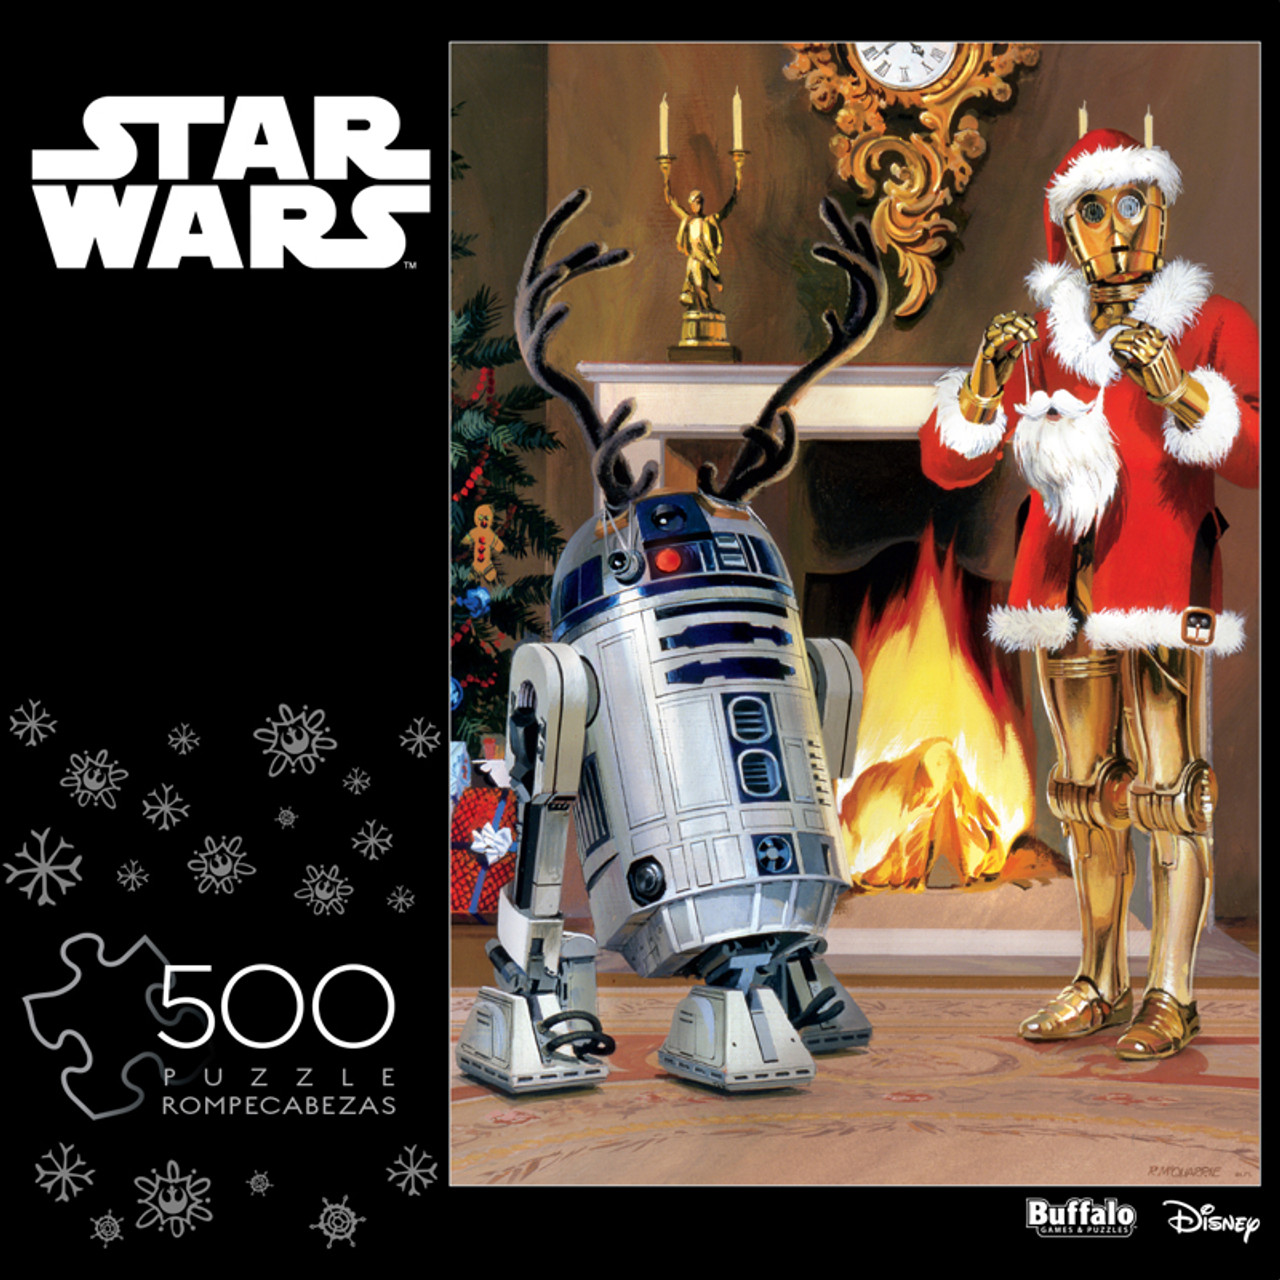 Star Wars™ “All I Want For Christmas Is R2” 500 Piece Jigsaw Puzzle